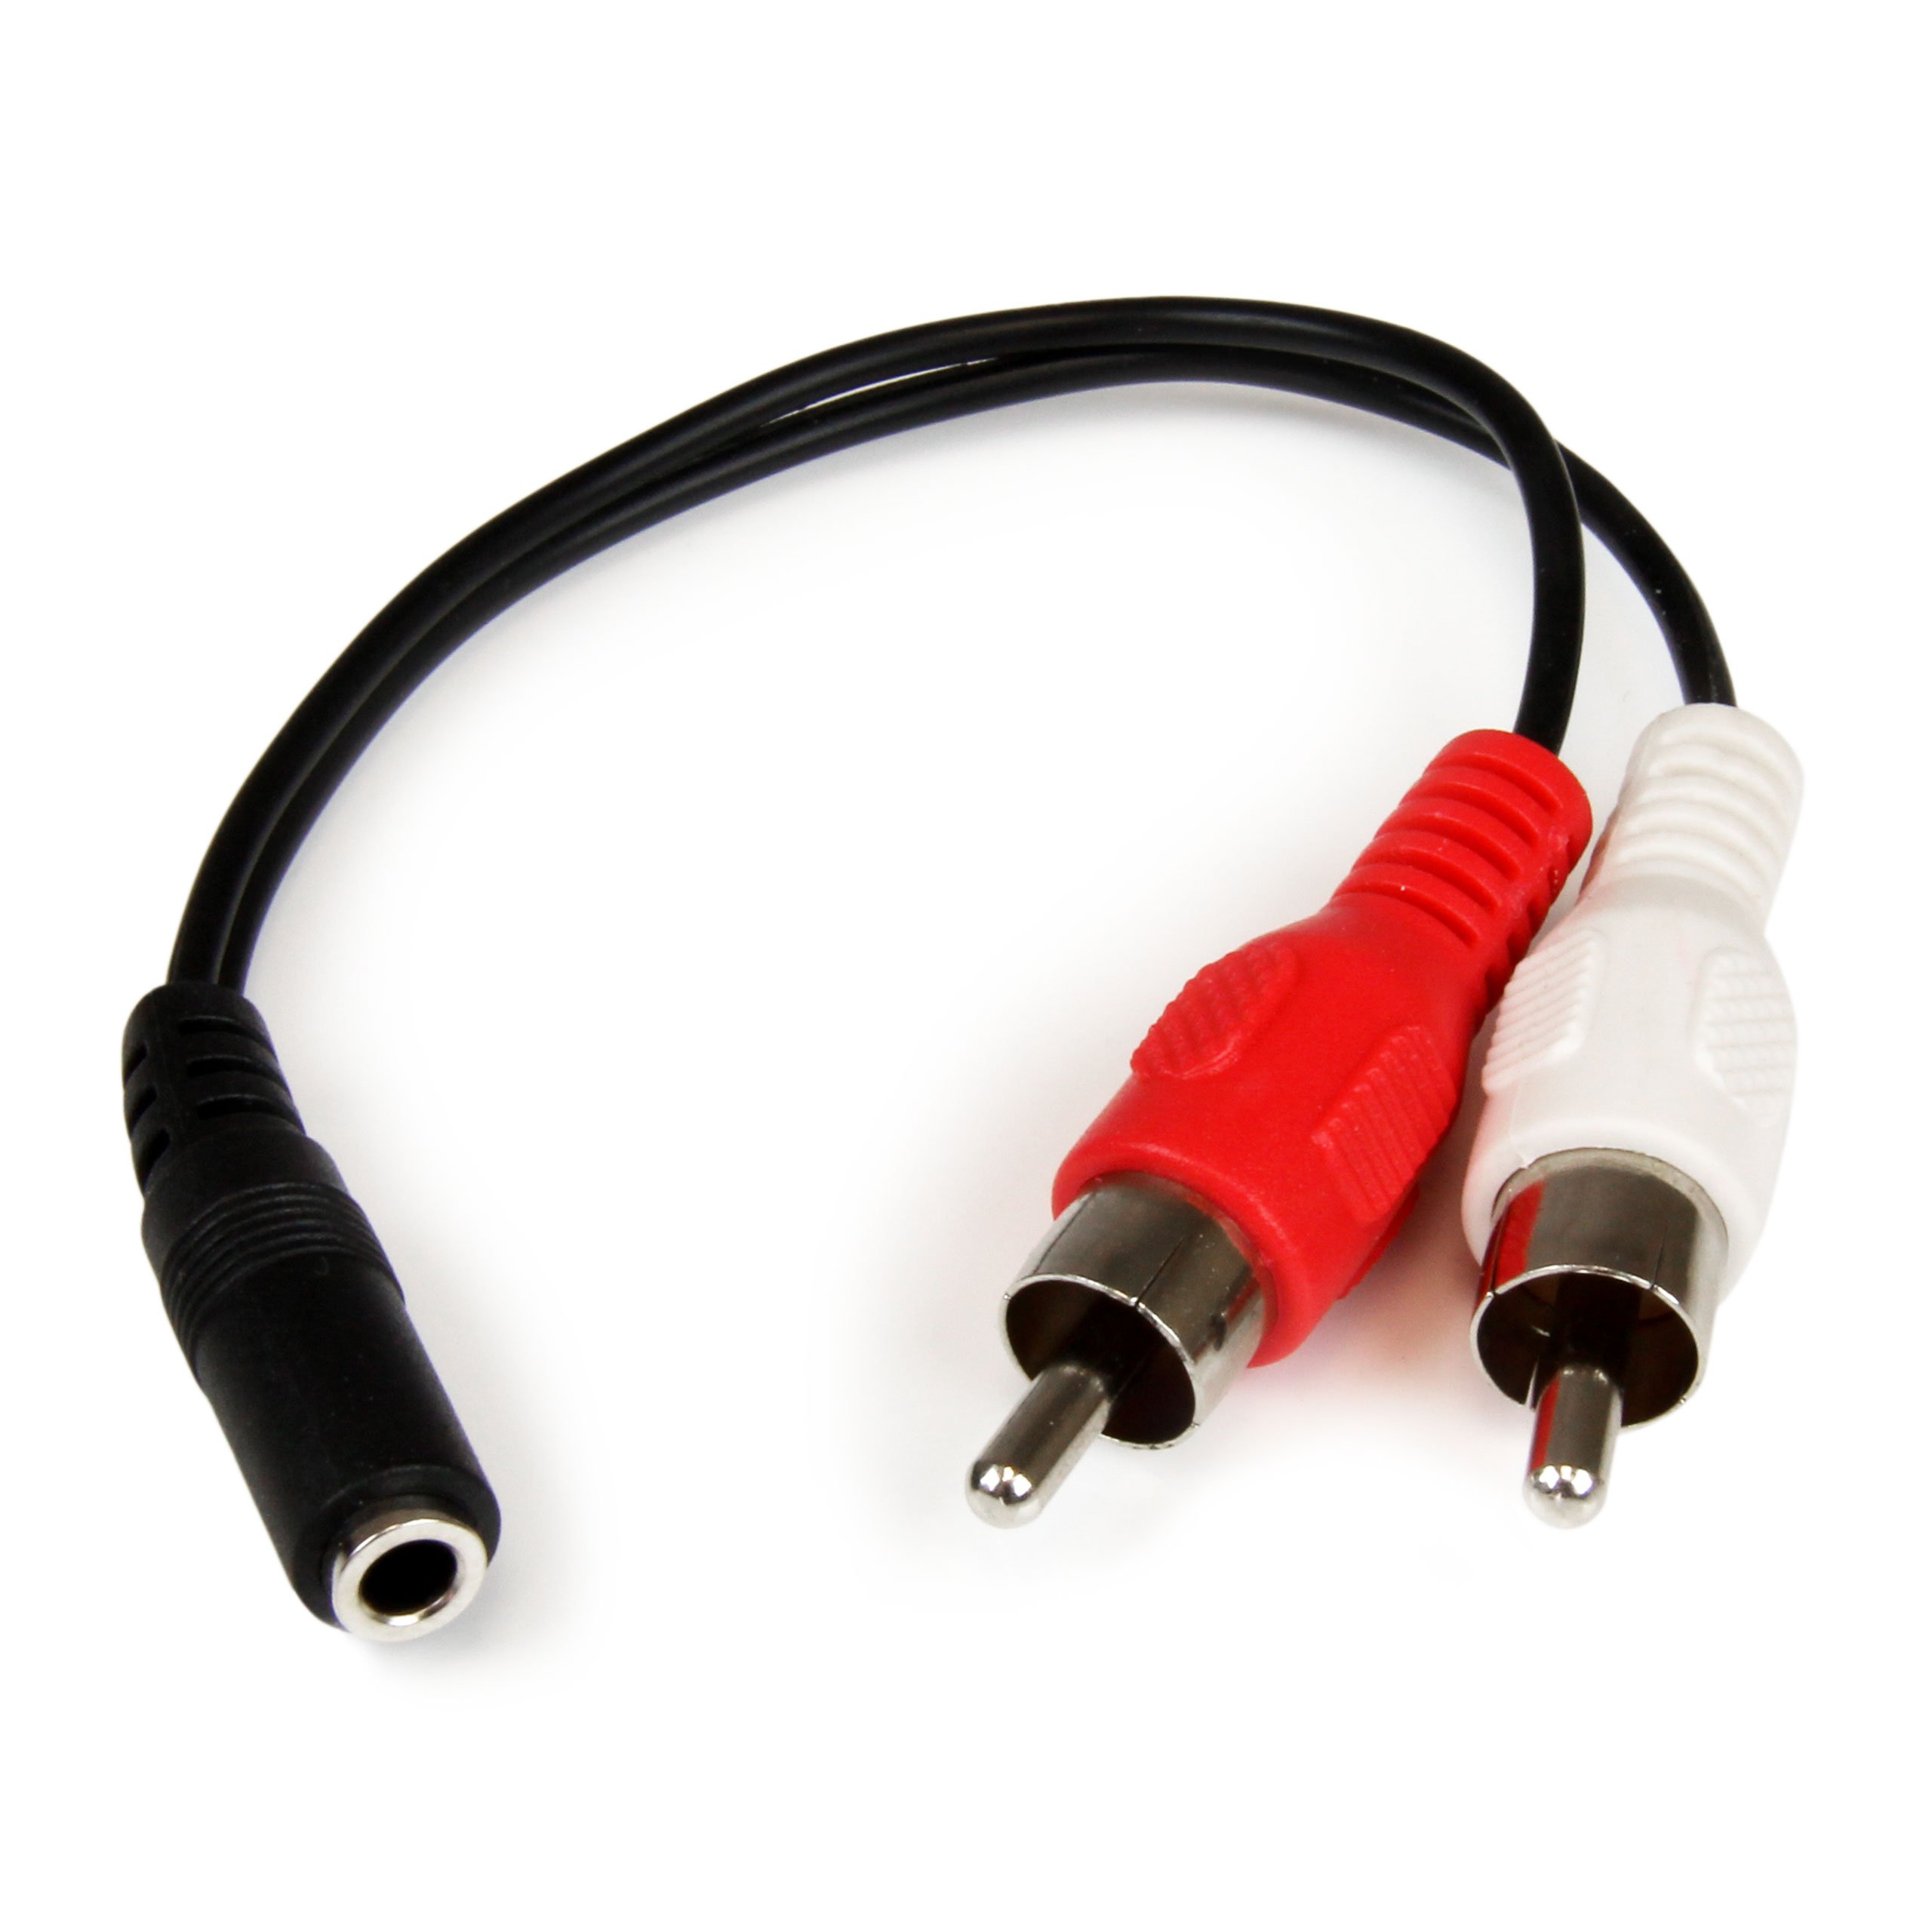 StarTech.com 6in RCA to 3.5mm Female Cable - Audio to RCA Cable - 3.5mm Female to 2x RCA Male - Aux to RCA - Stereo Audio Cable (MUFMRCA)